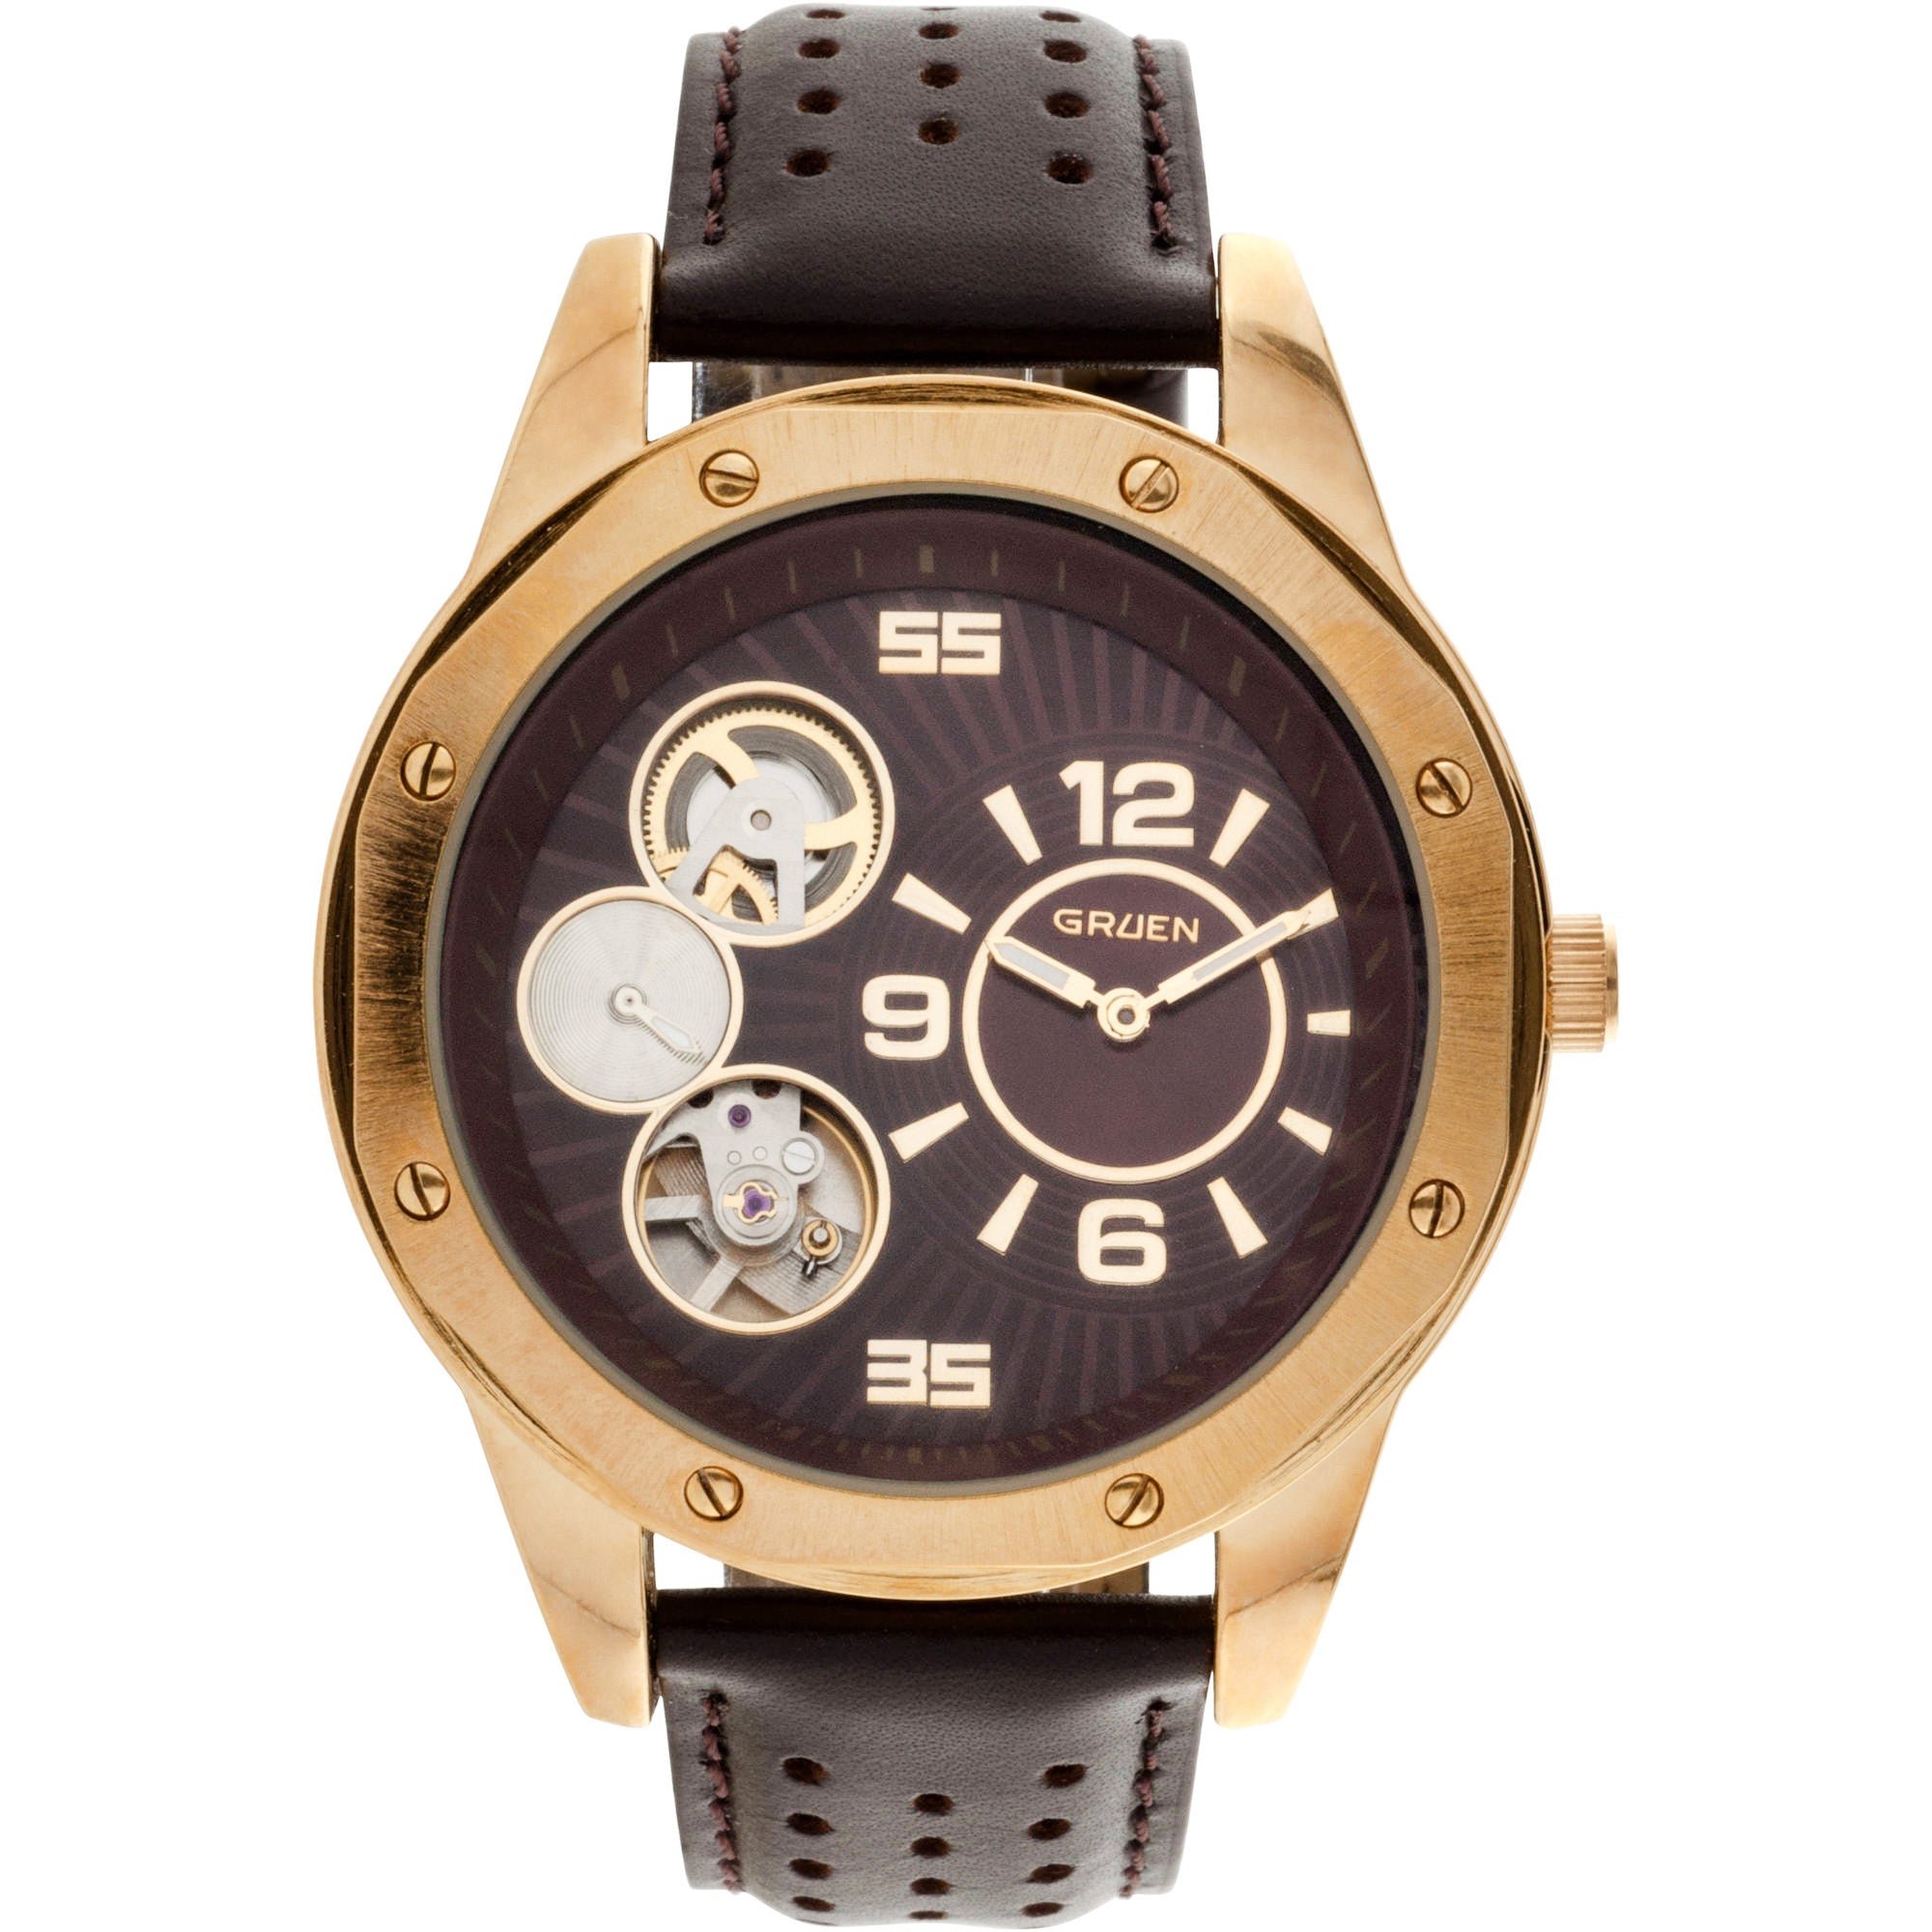 Model: Men's Gruen Semi-Automatic Watch with Round Polished Gold Case and Genuine Brown Leather Strap